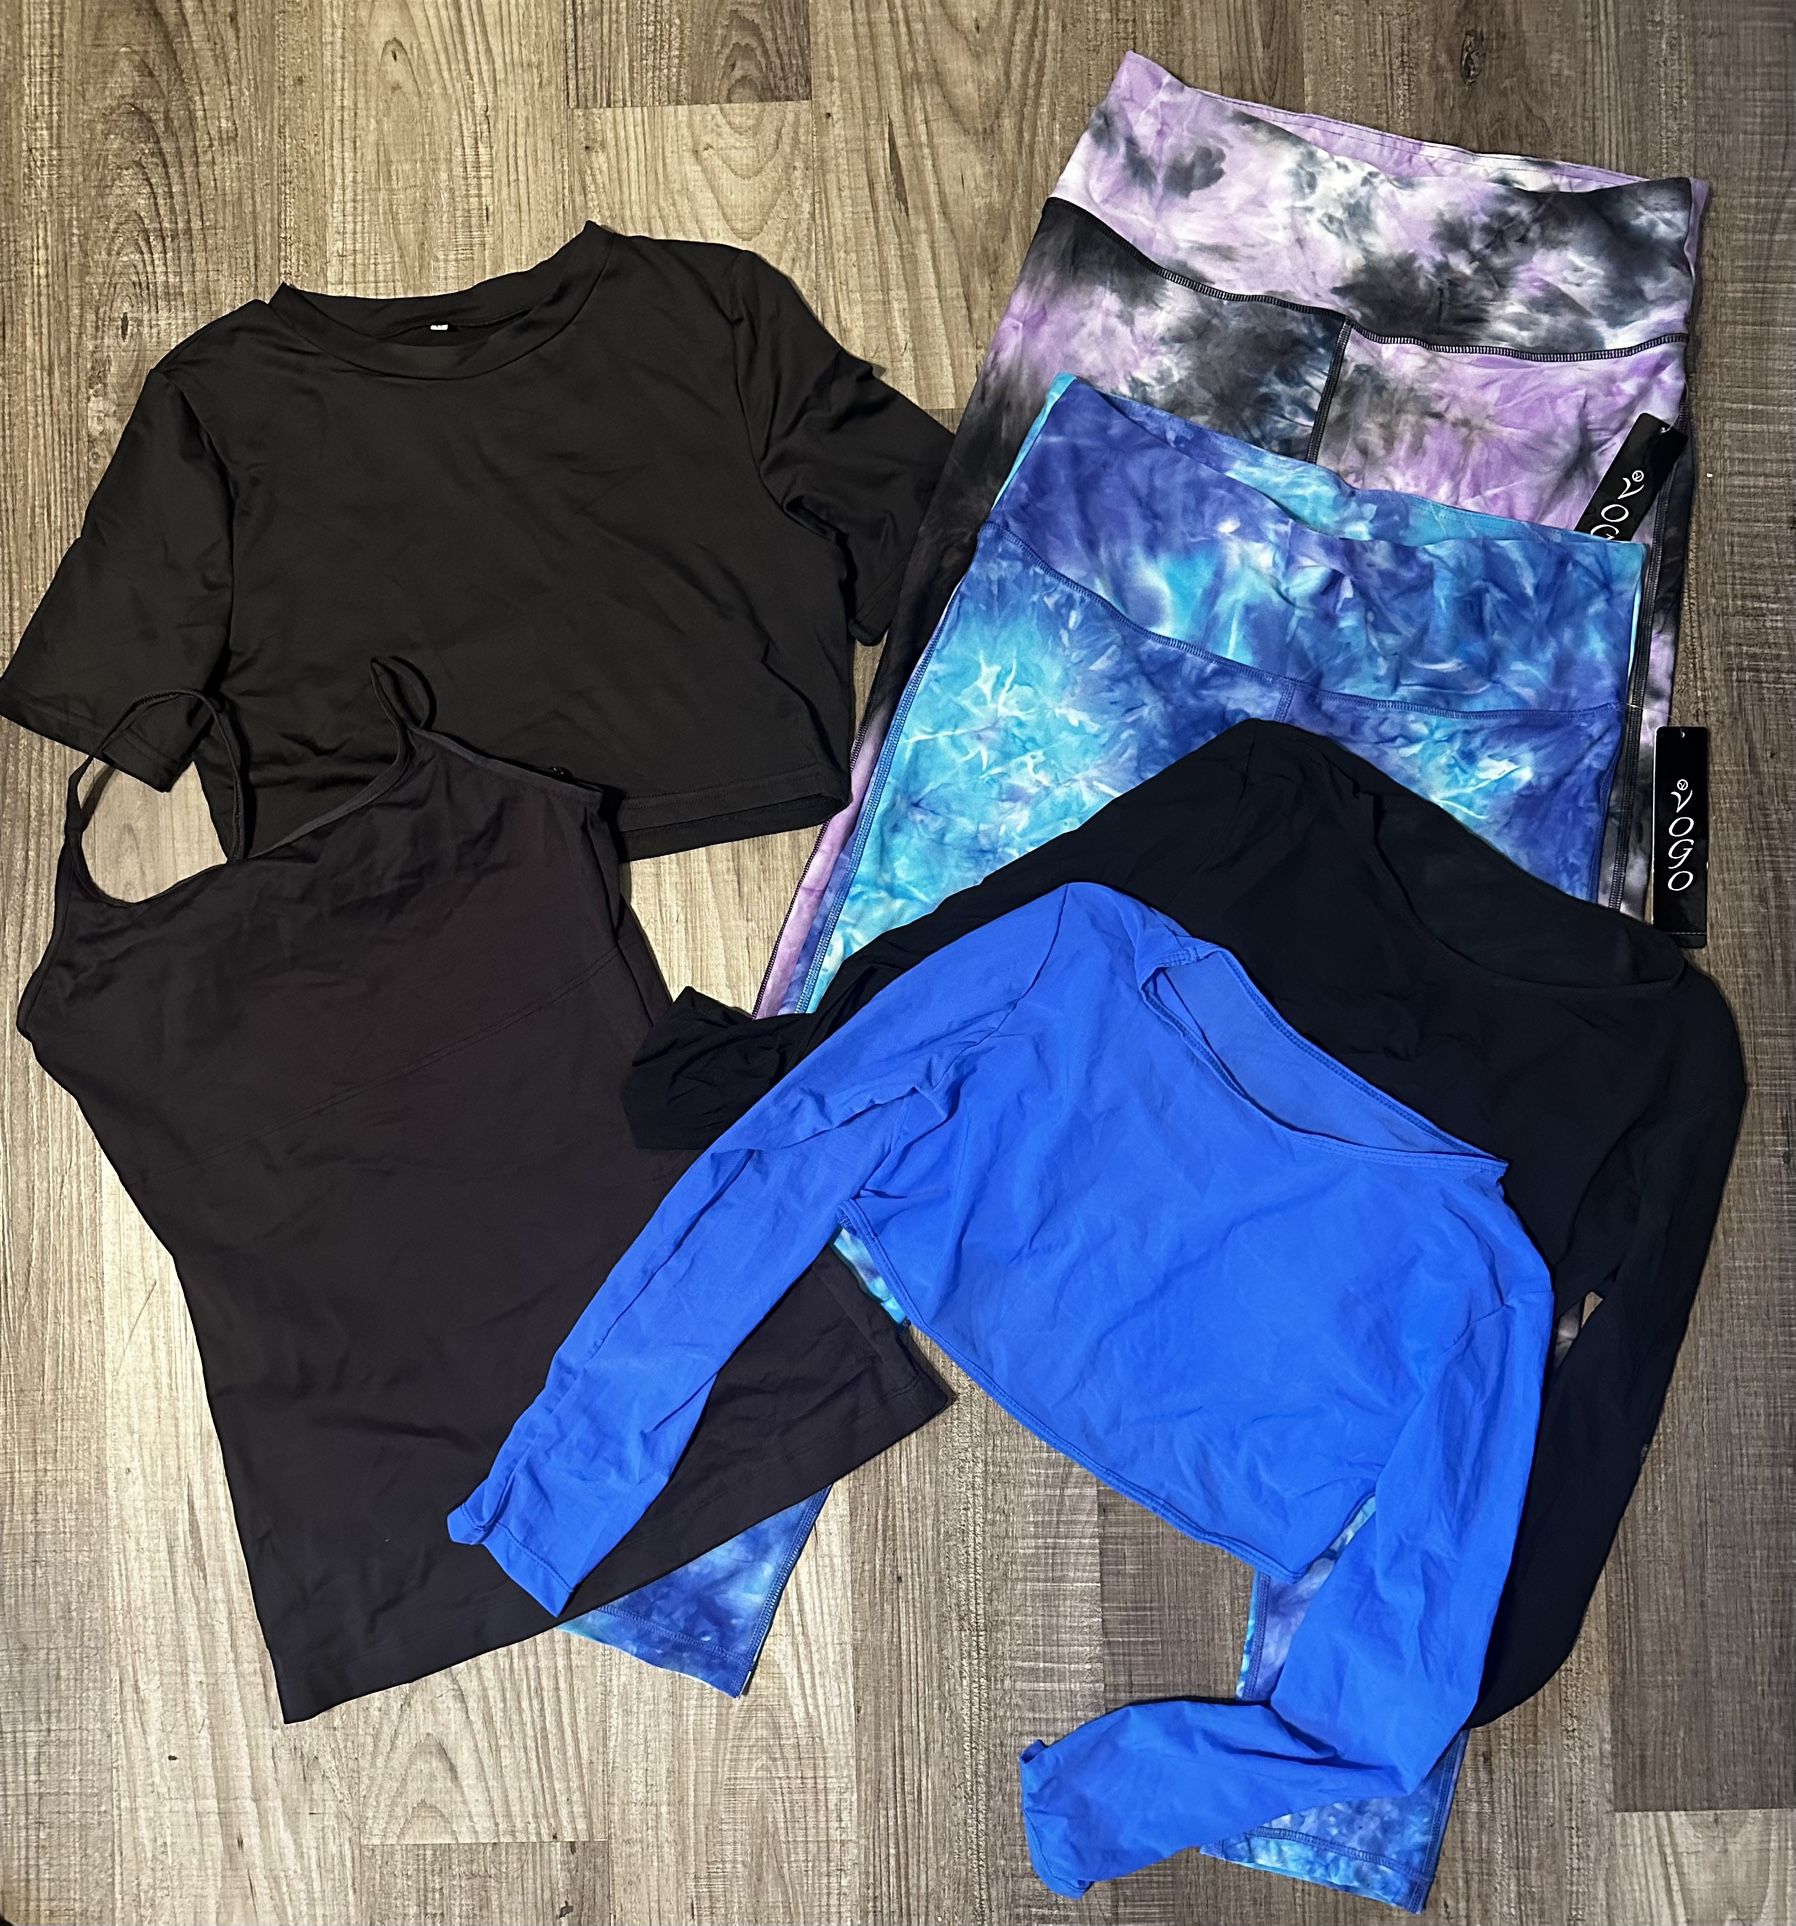 Women Workout Clothing Size L ($15 all)